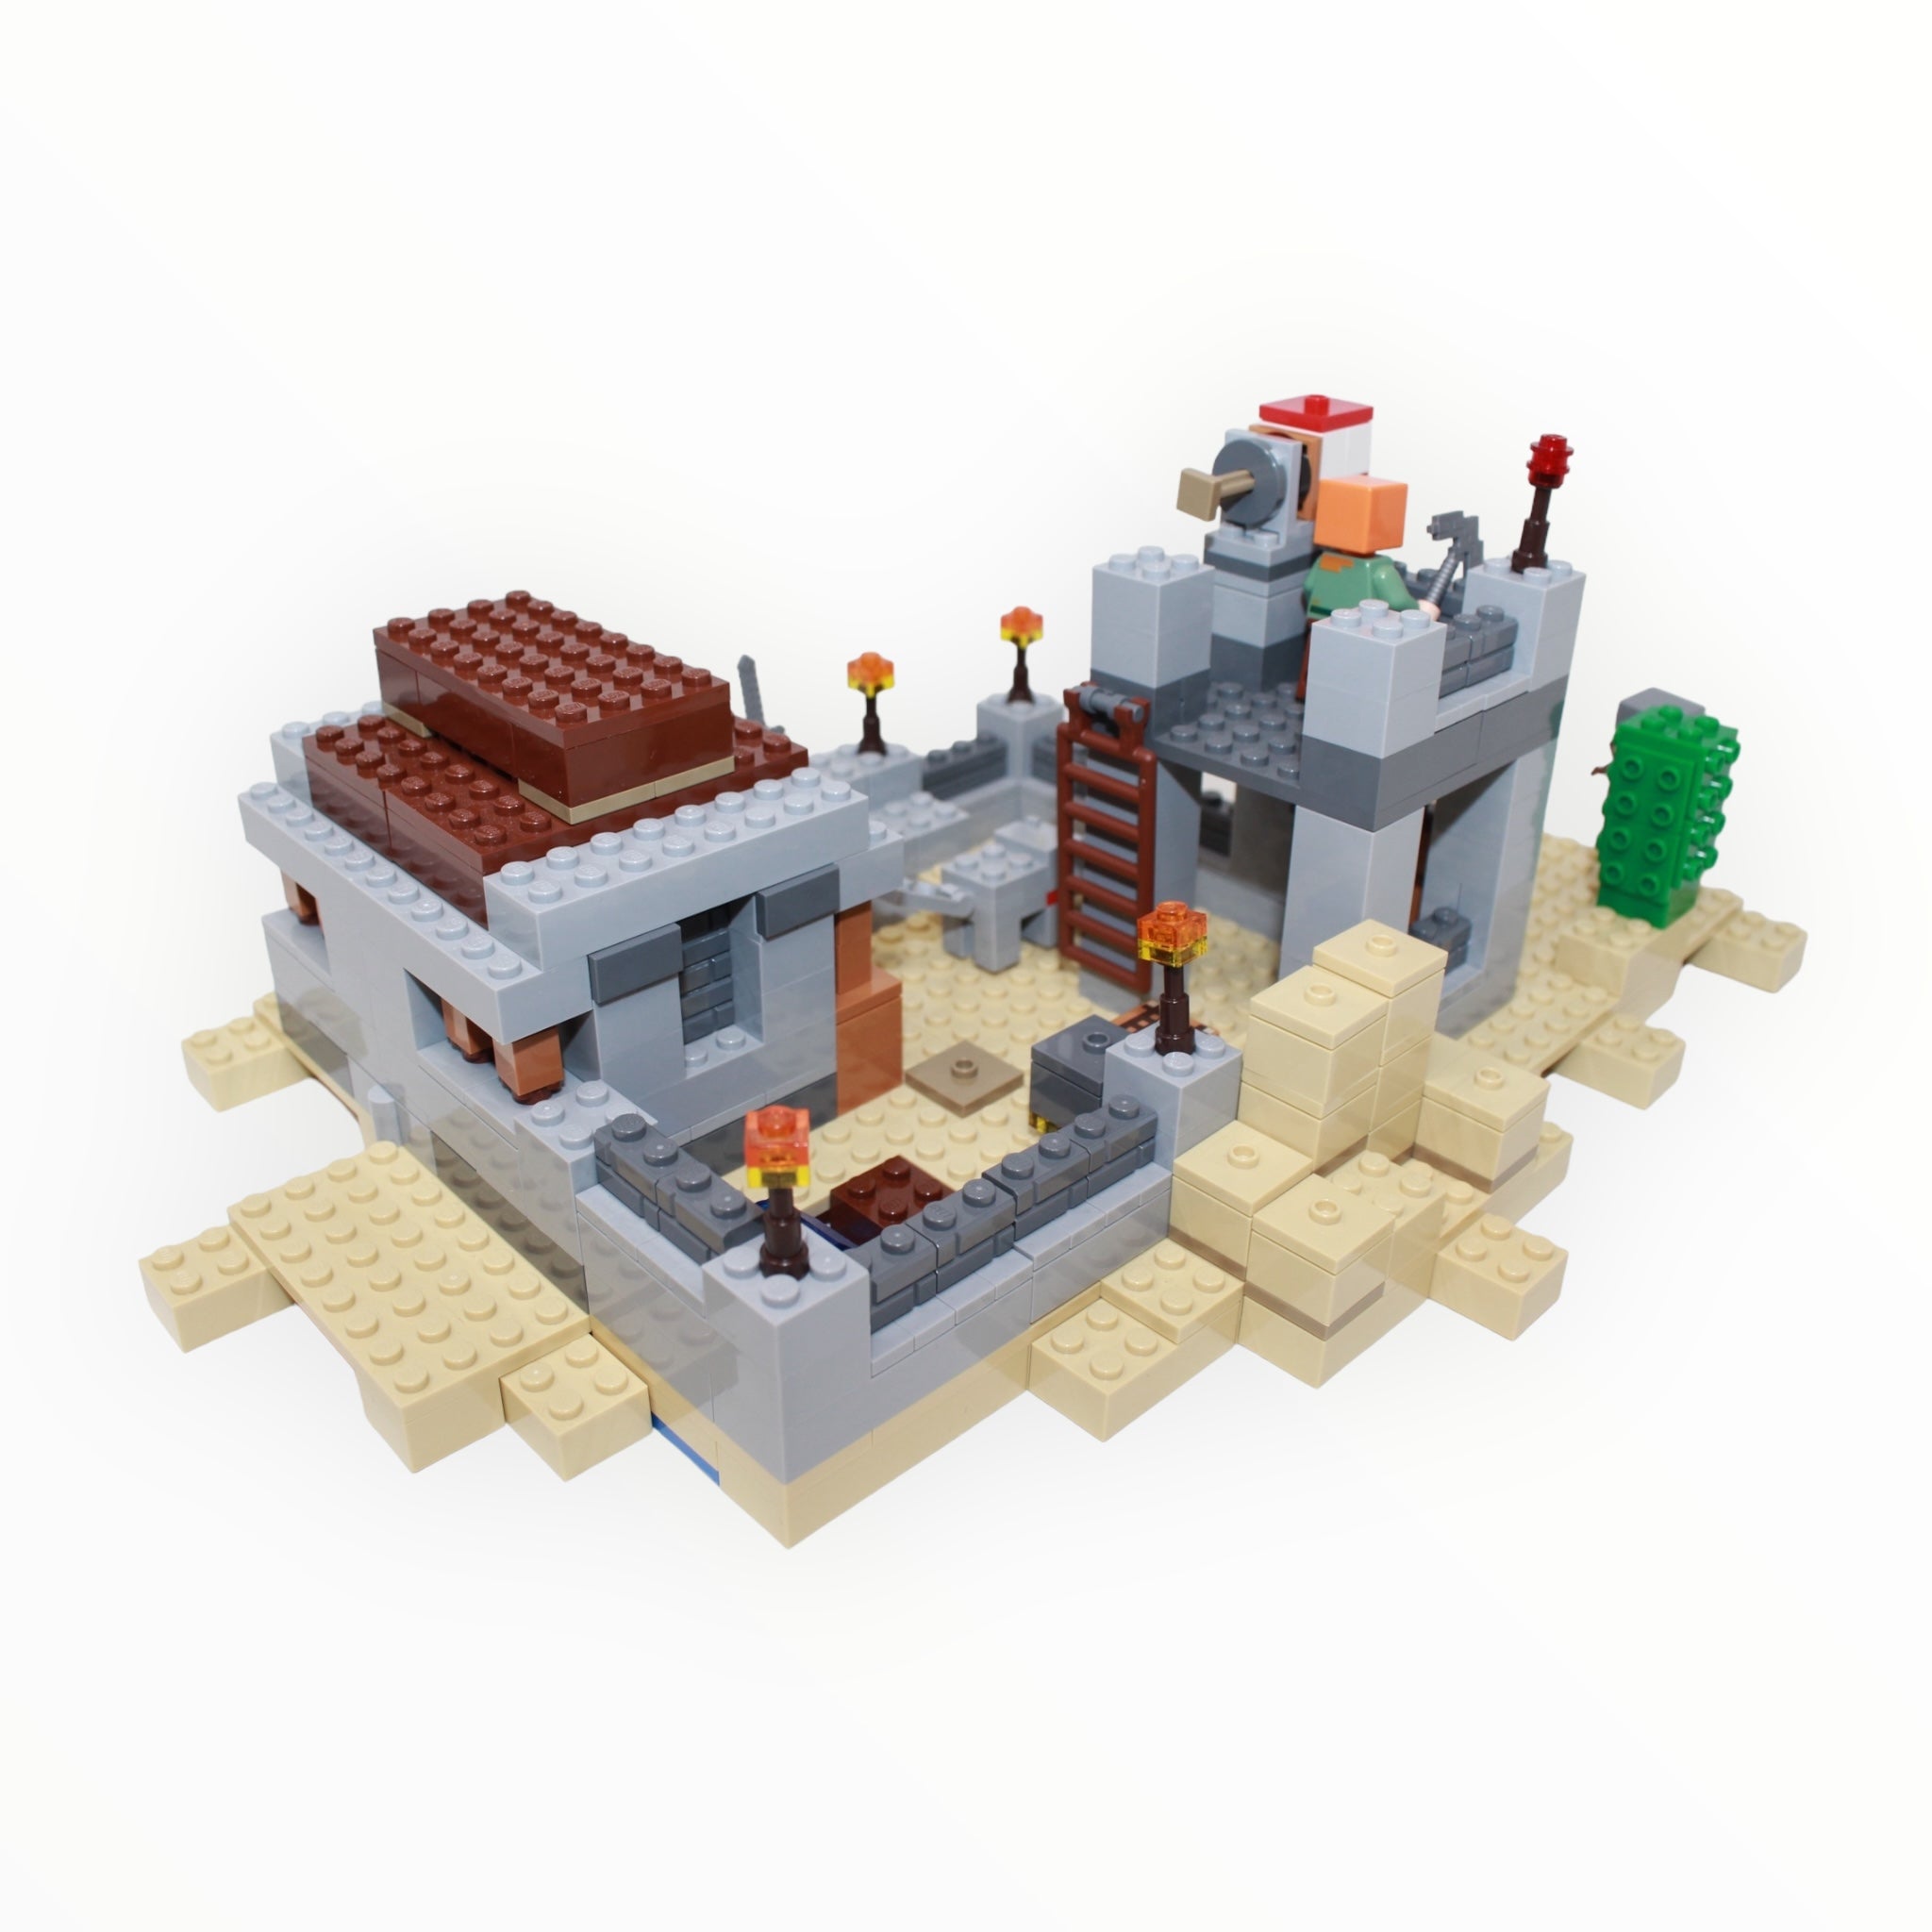 Used Set 21121 Minecraft The Desert Outpost